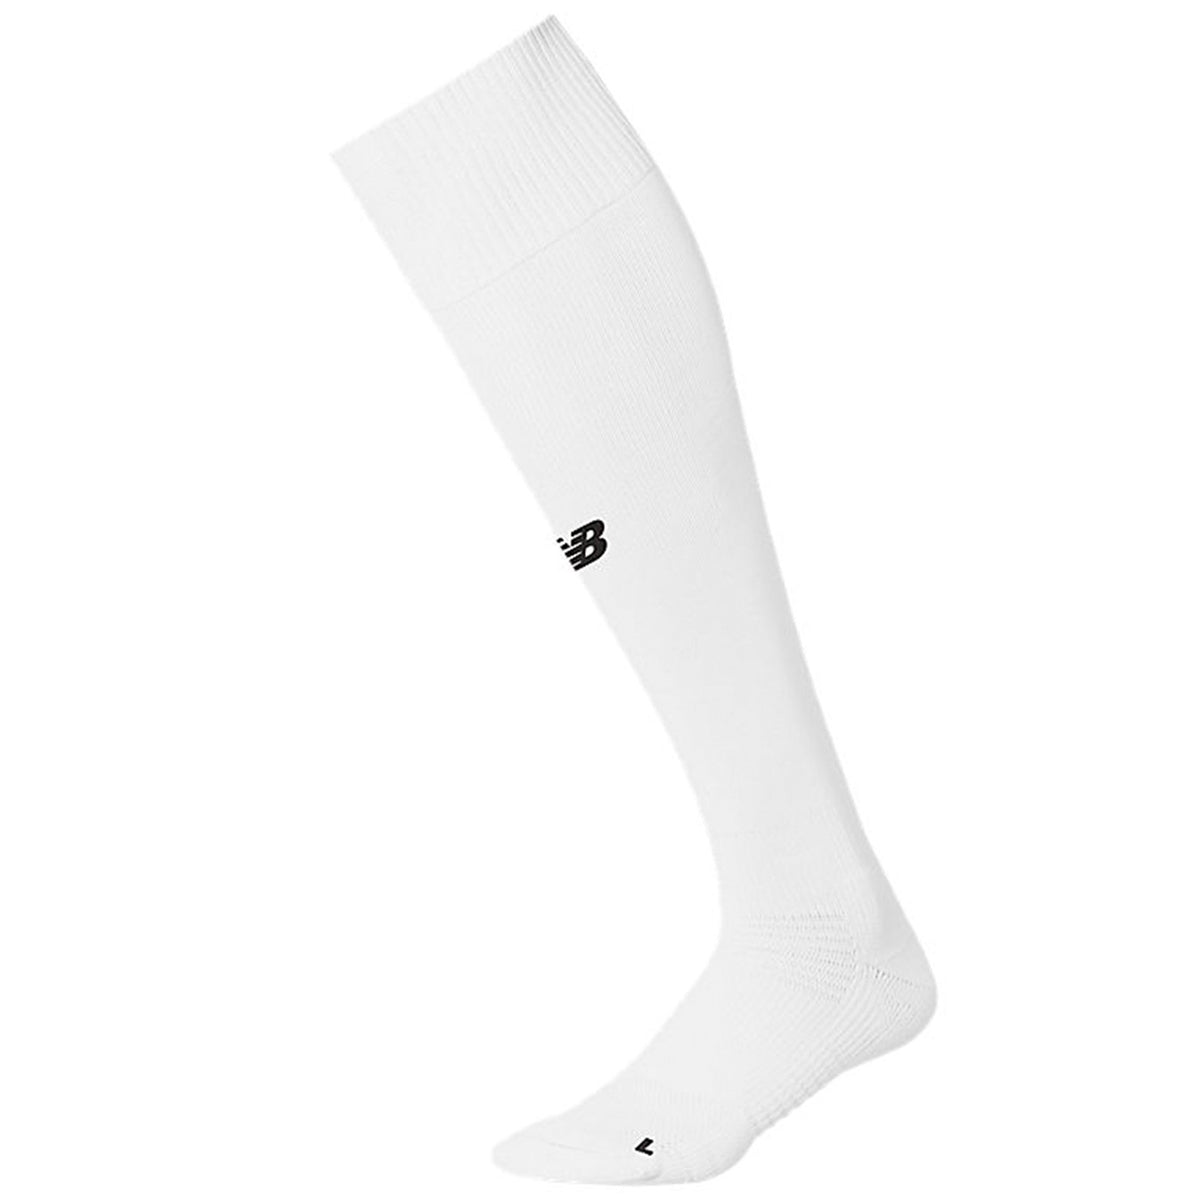 NWISC 2021 Match Sock - White by Goal Kick Soccer